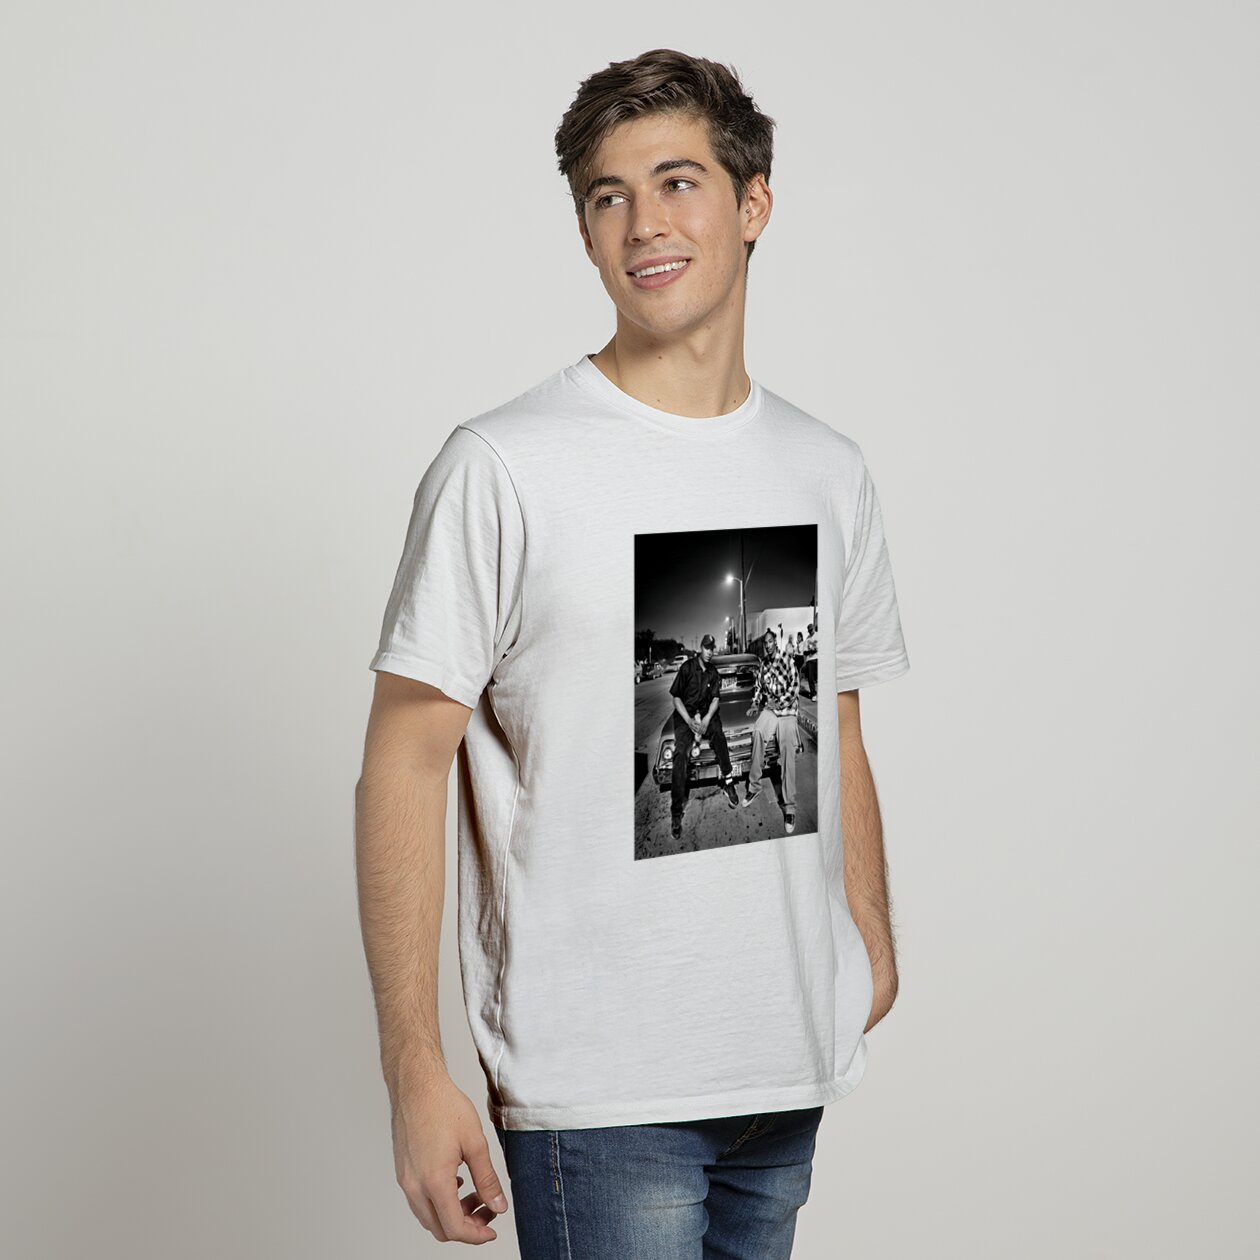 Legends of Hip Hop Vintage Graphic Tee featuring Eminem, Dr. Dre, Ice Cube, and Snoop Dogg DZT01